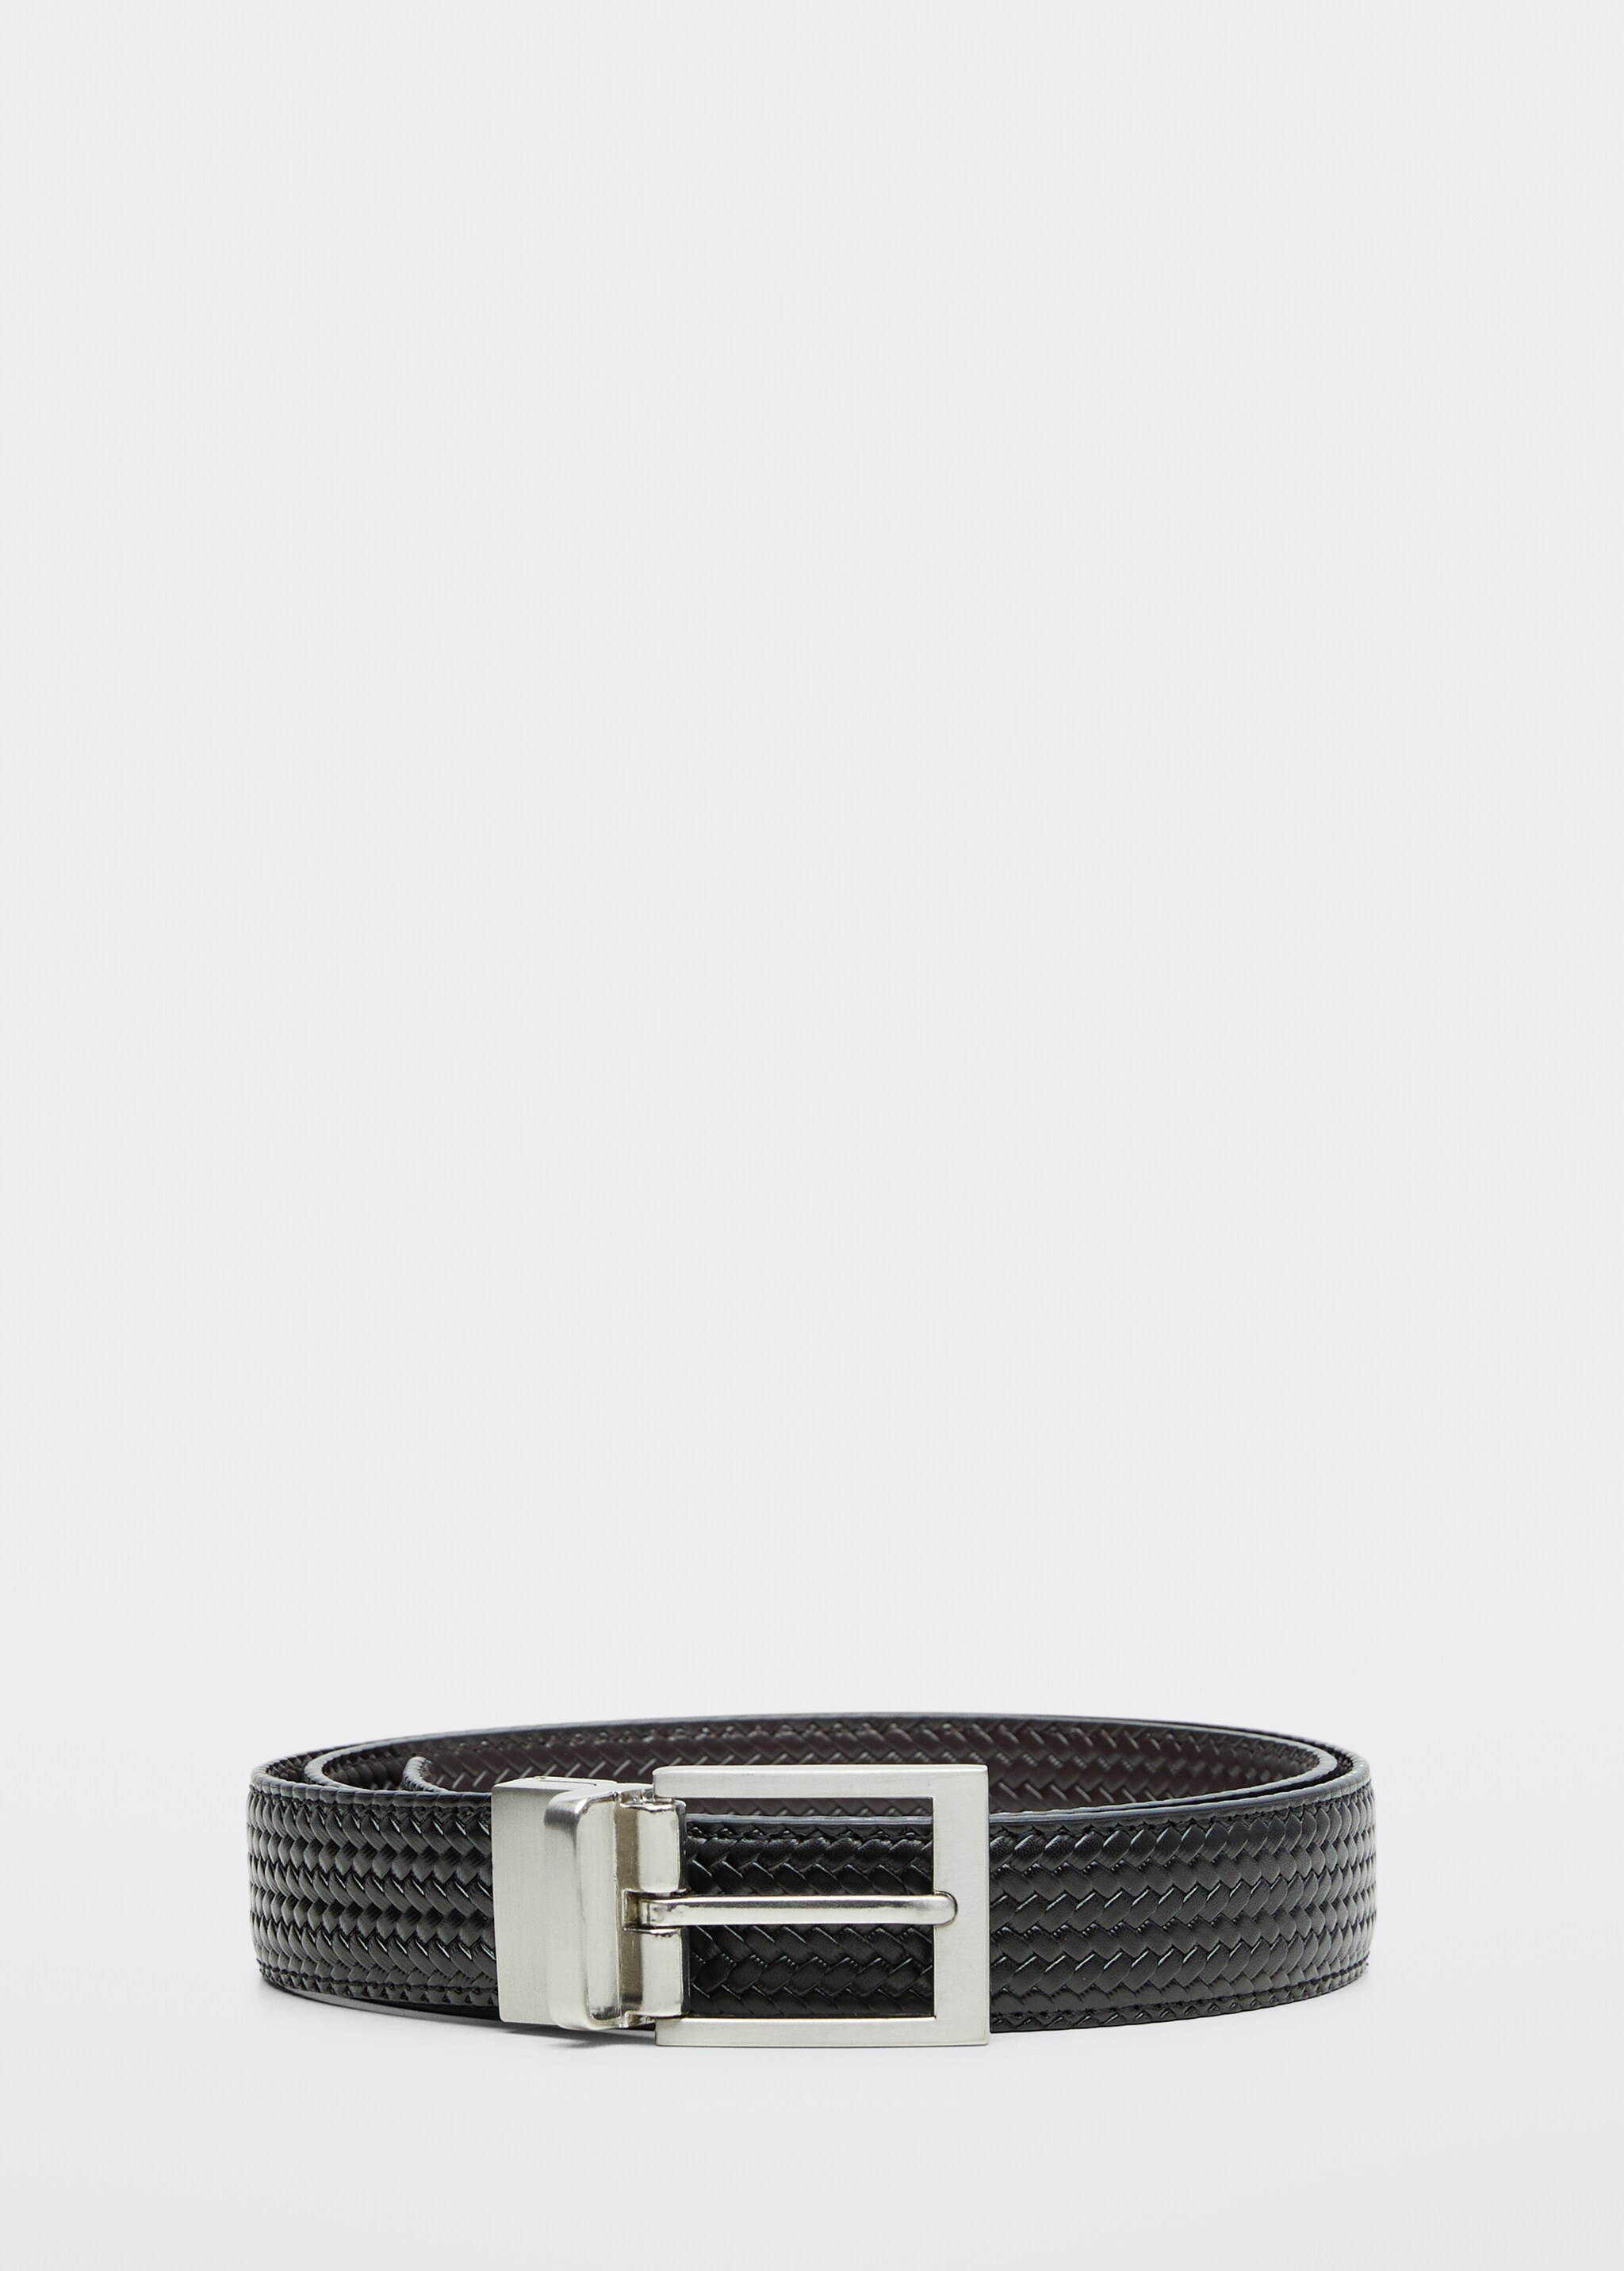 Reversible braided leather belt - Article without model